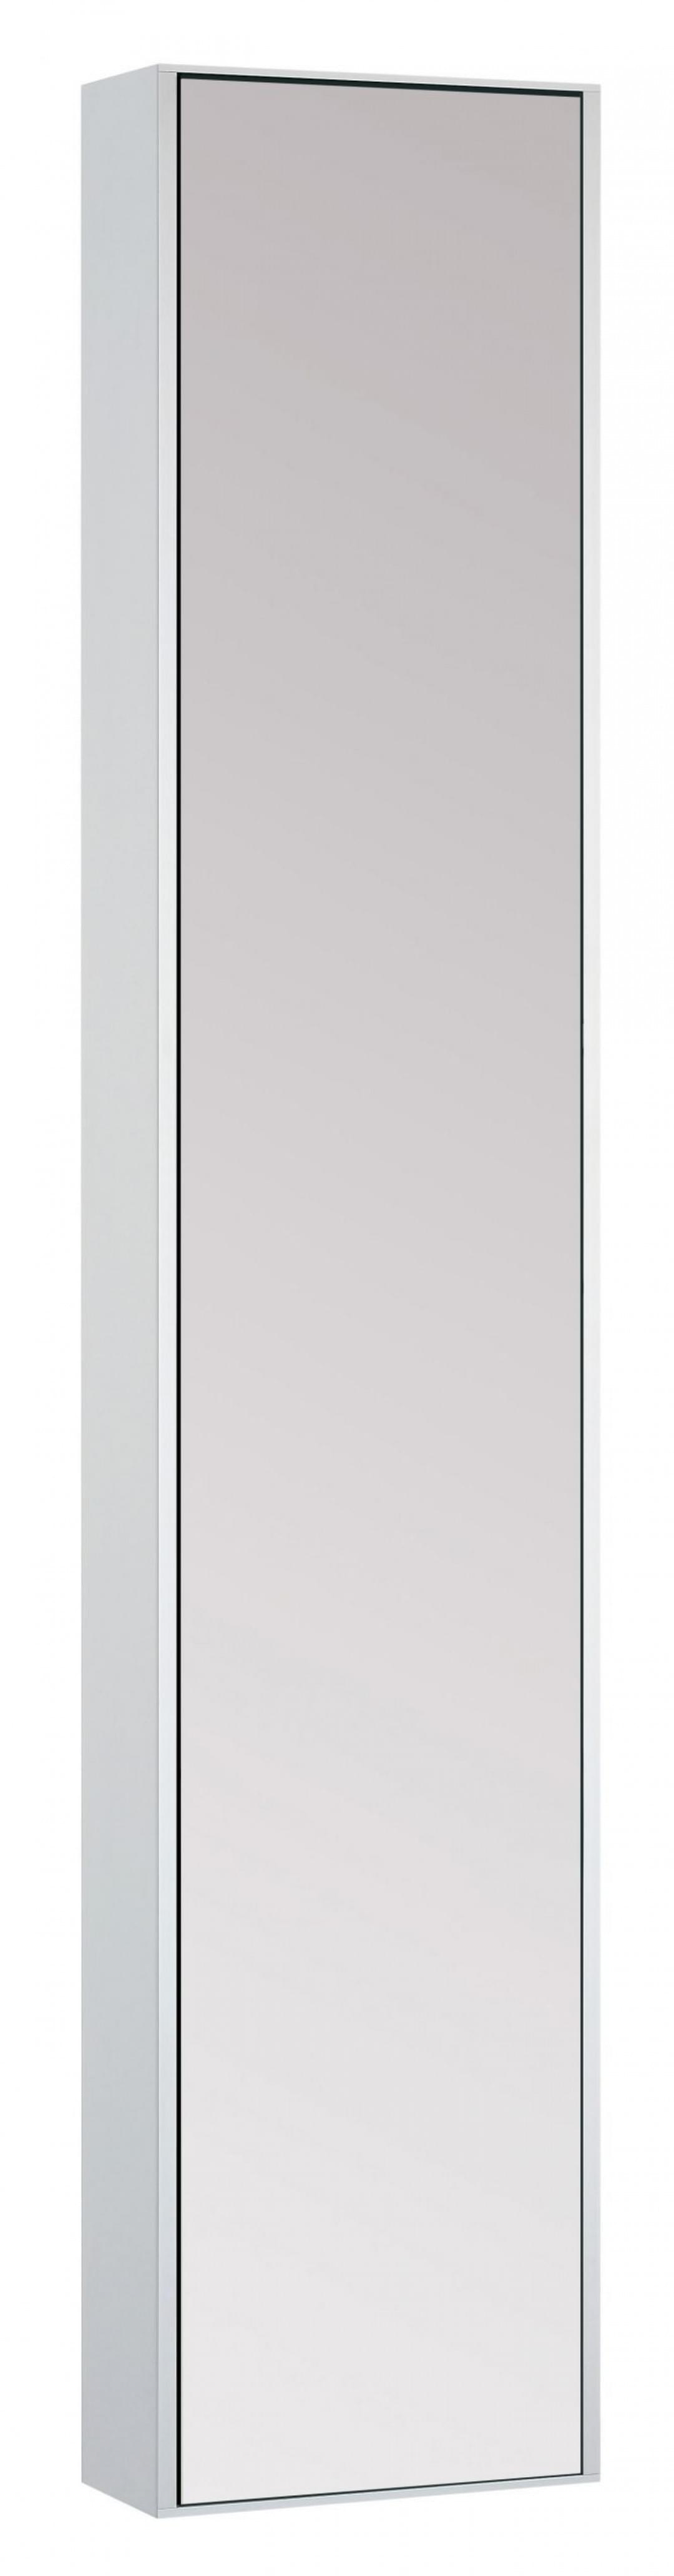 Cabinet module with mirrored-door (both sides) – surface-mounted model from Emco